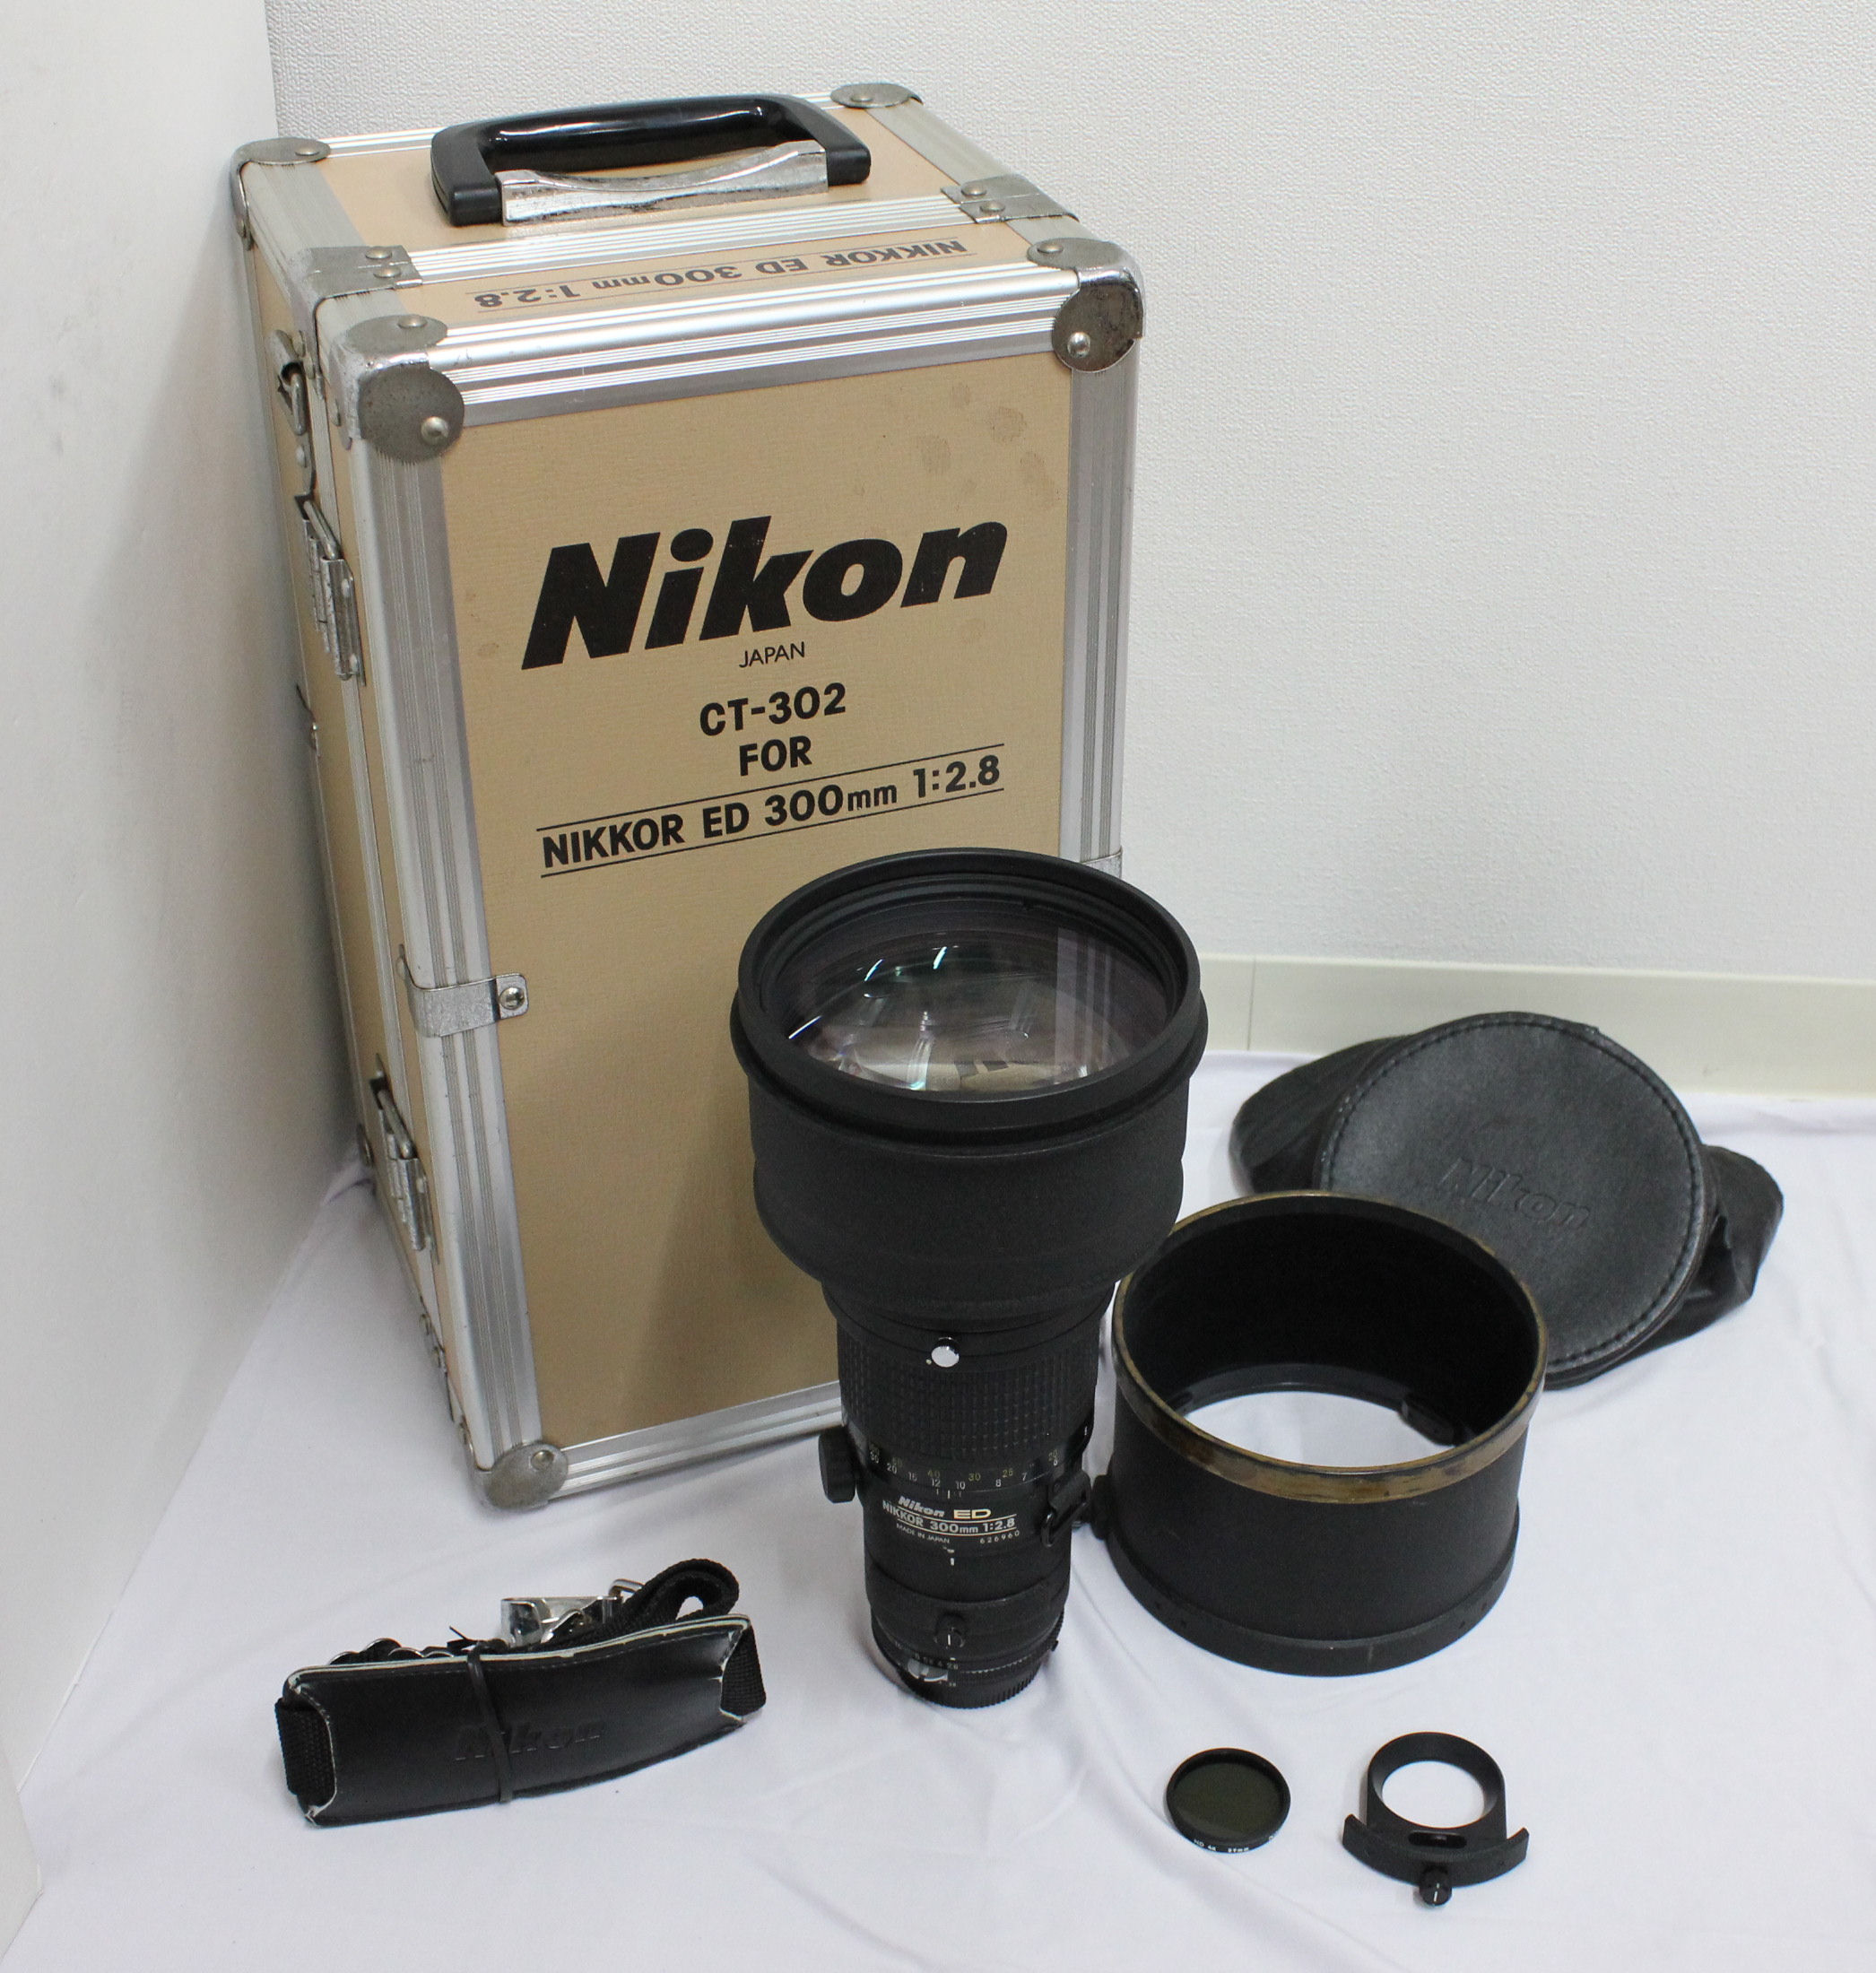 Japan Used Camera Shop | [Near Mint] Nikon Ai-S Nikkor ED 300mm F2.8 IF Lens with Case and Accessories from Japan